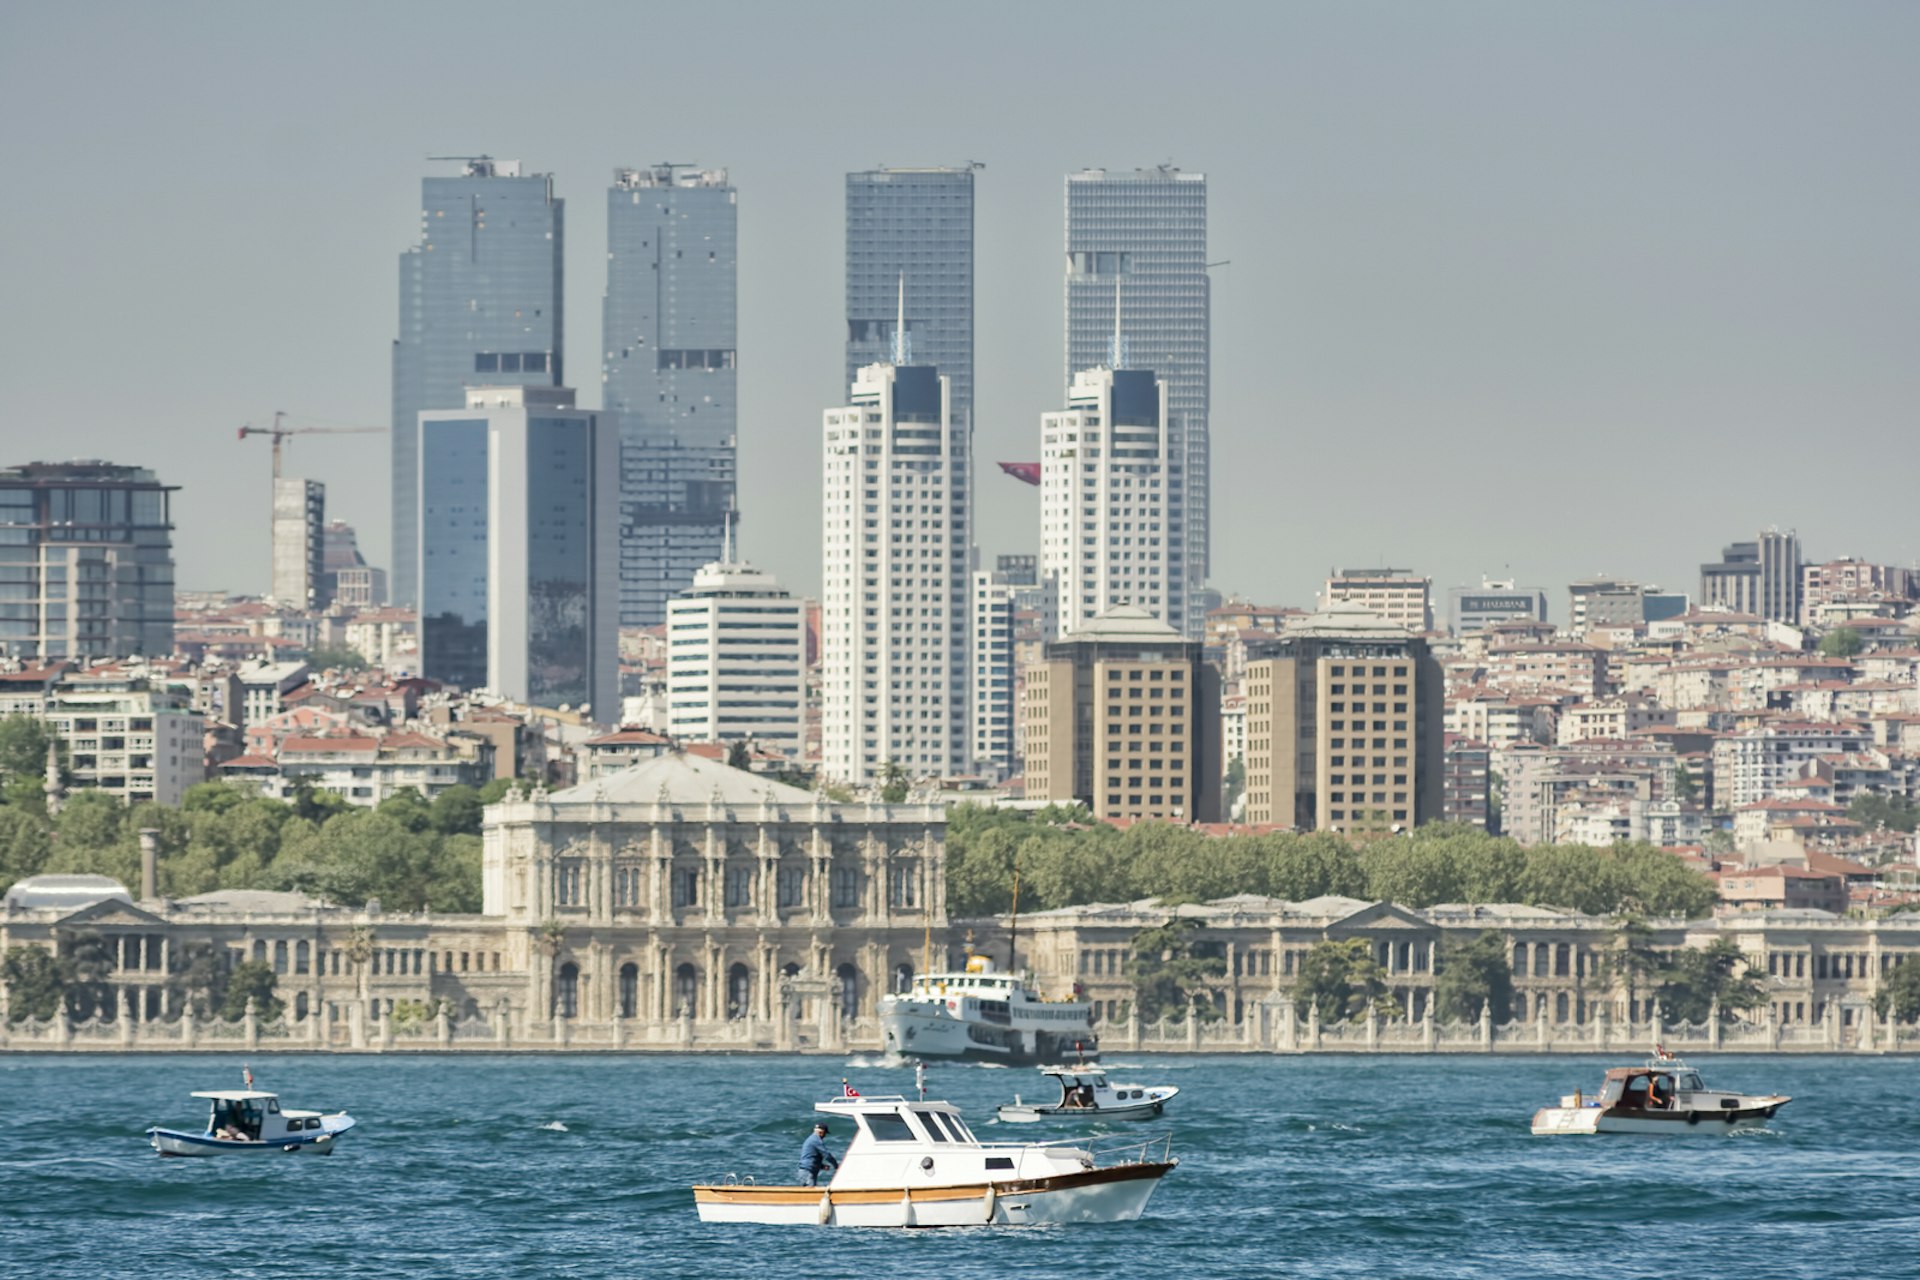 Fishing boats on the Bosphorus, Dolmabahce Palace and skyscrapers from Besiktas District in the background, Istanbul, Turkey